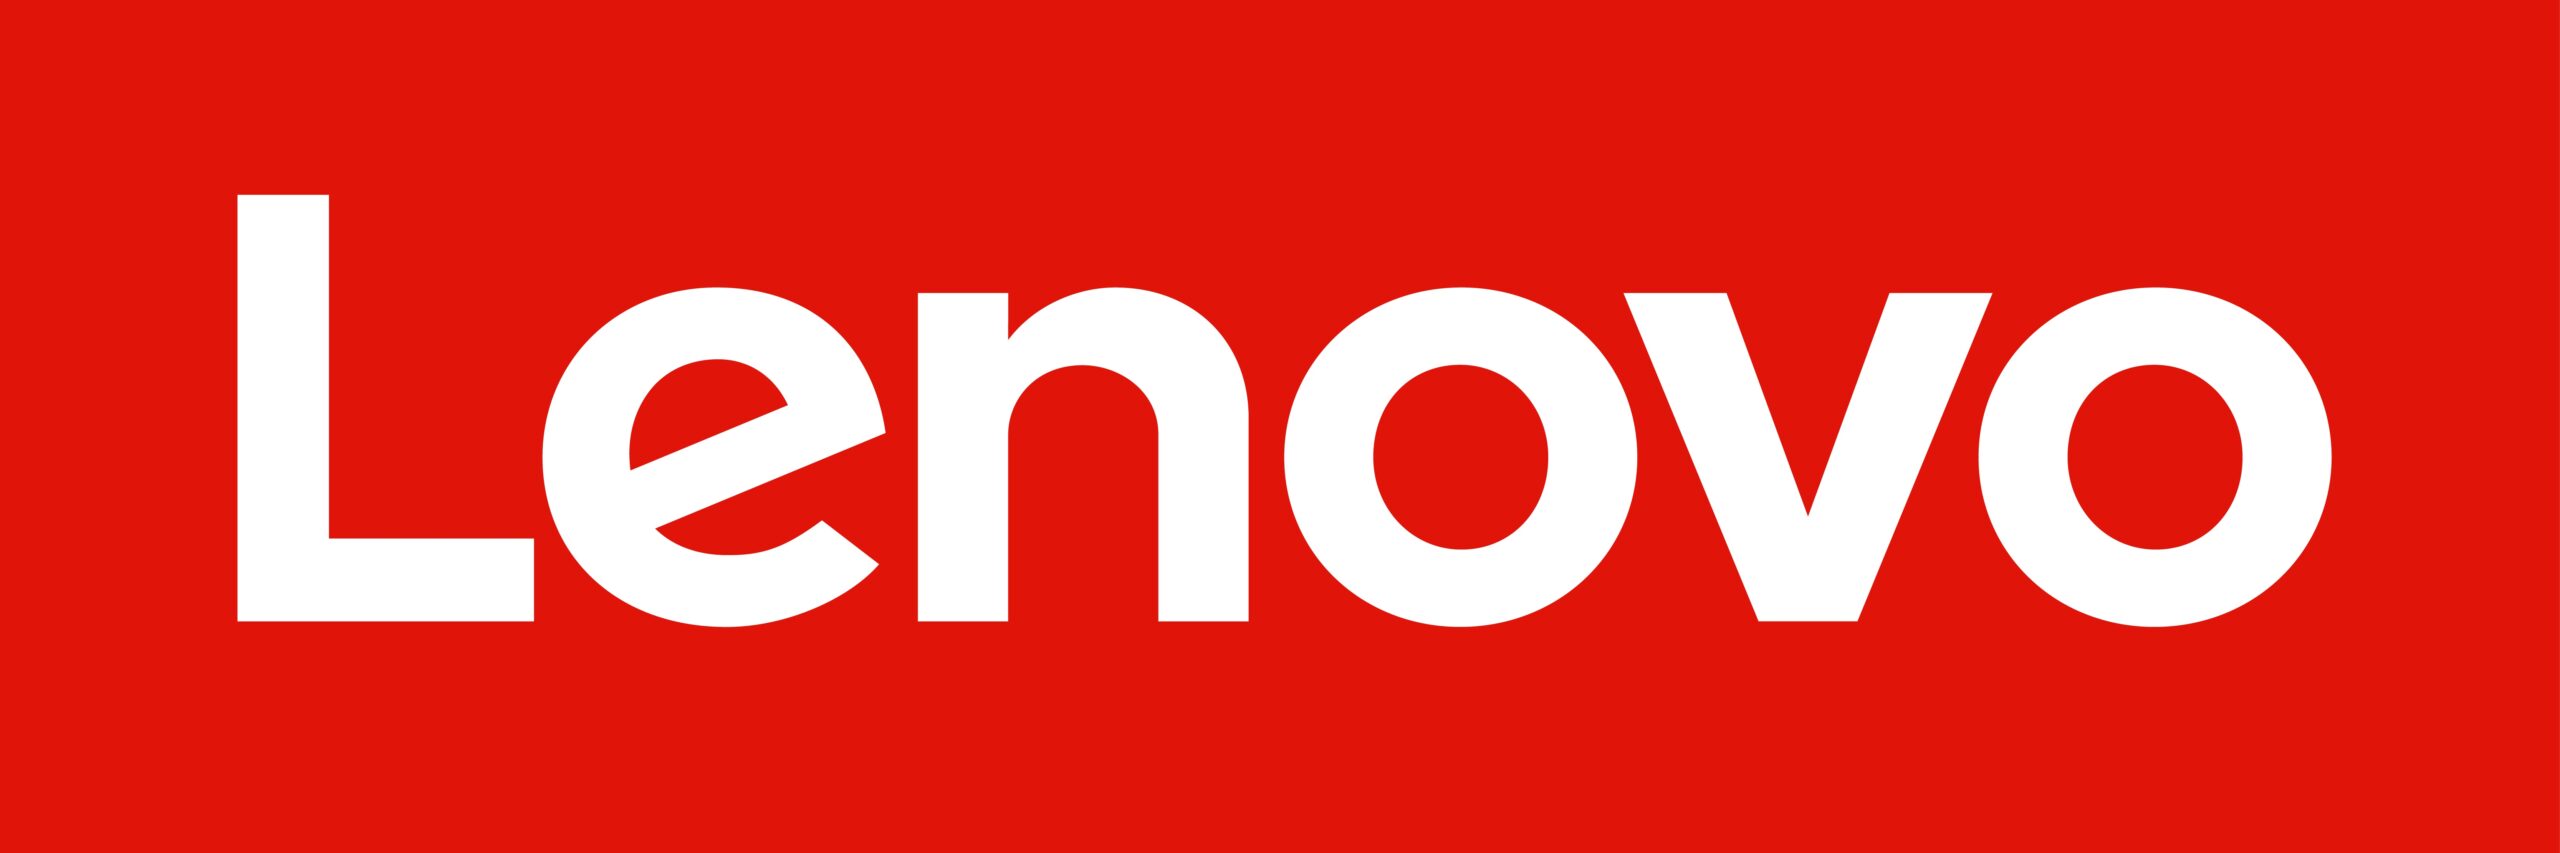 Lenovo Solid Fill Logo for use in print and digital applications